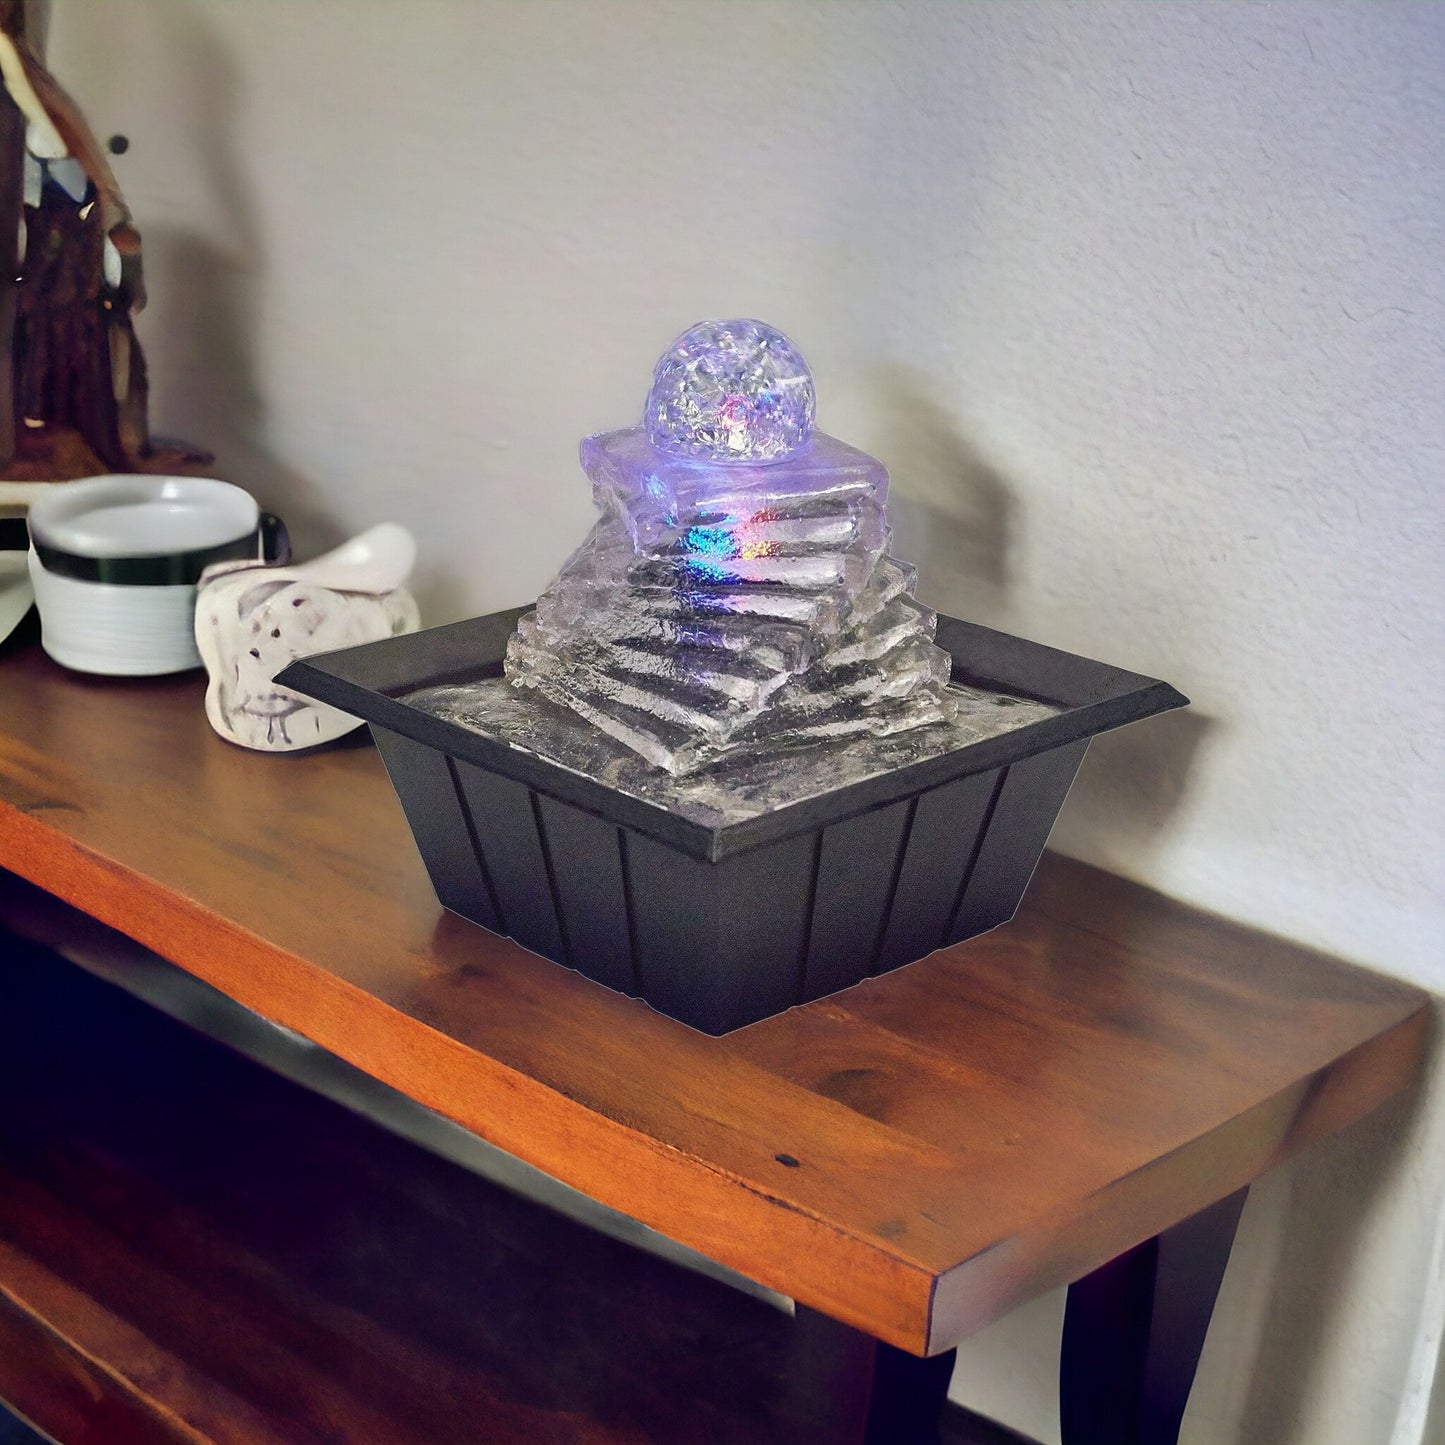 8" Clear Polyresin Ice Design Tabletop Fountain With LED